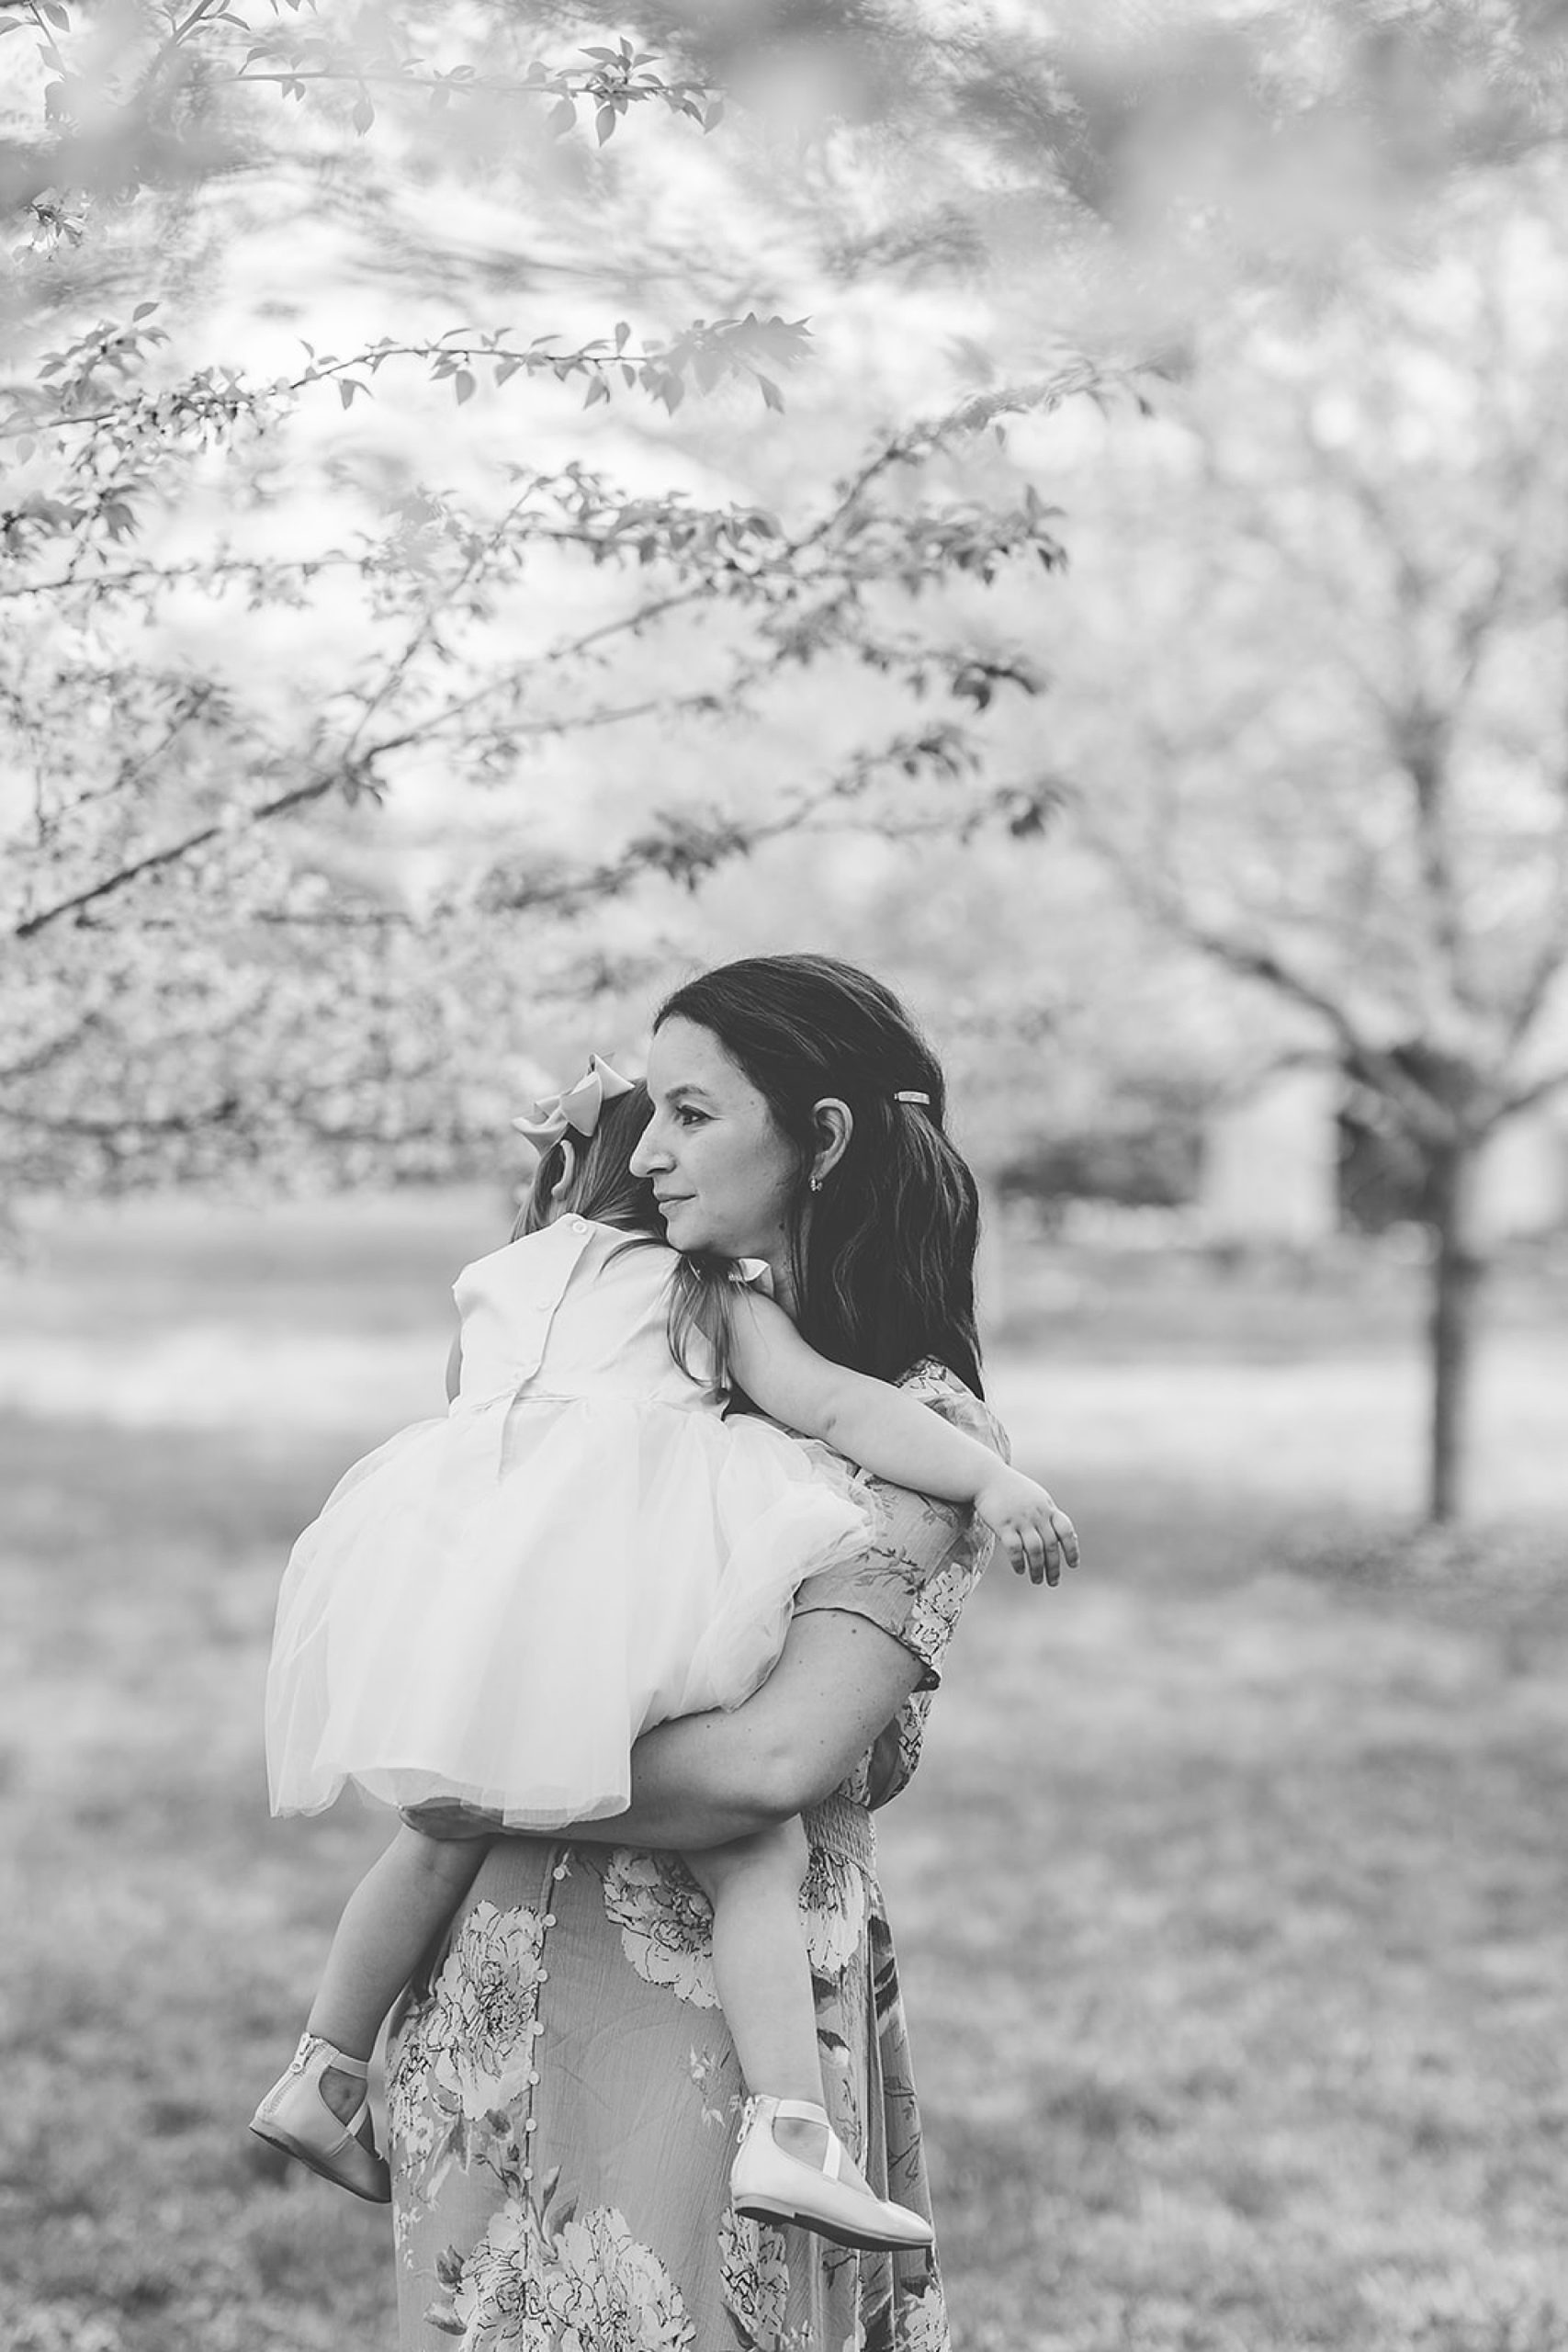 How to Decide Between Full vs. Mini Sessions - tips from DMV Family Photographer Christina Tundo Photography